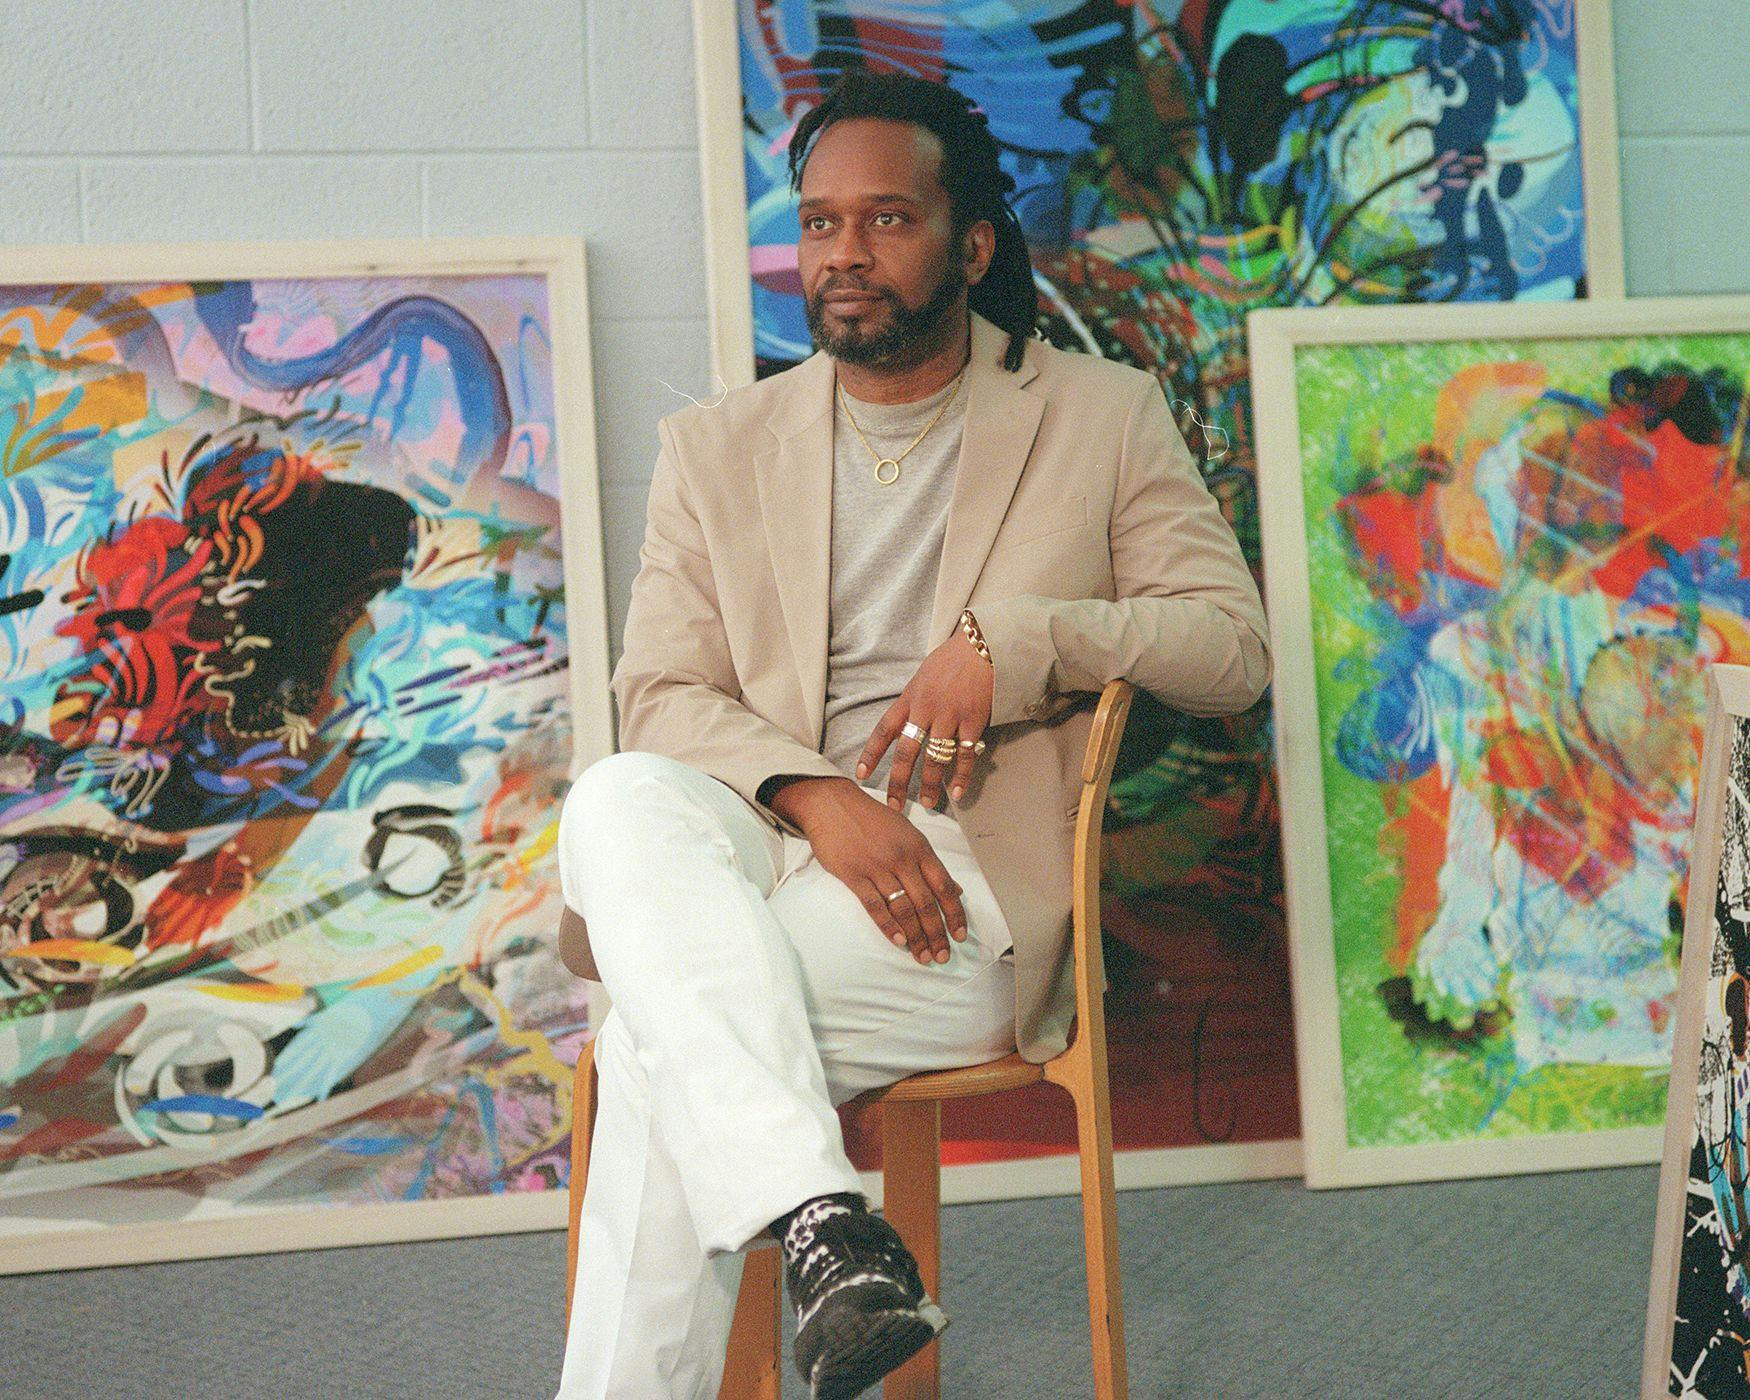 Moses Sun sits in a chair in his studio surrounded by paintings and books